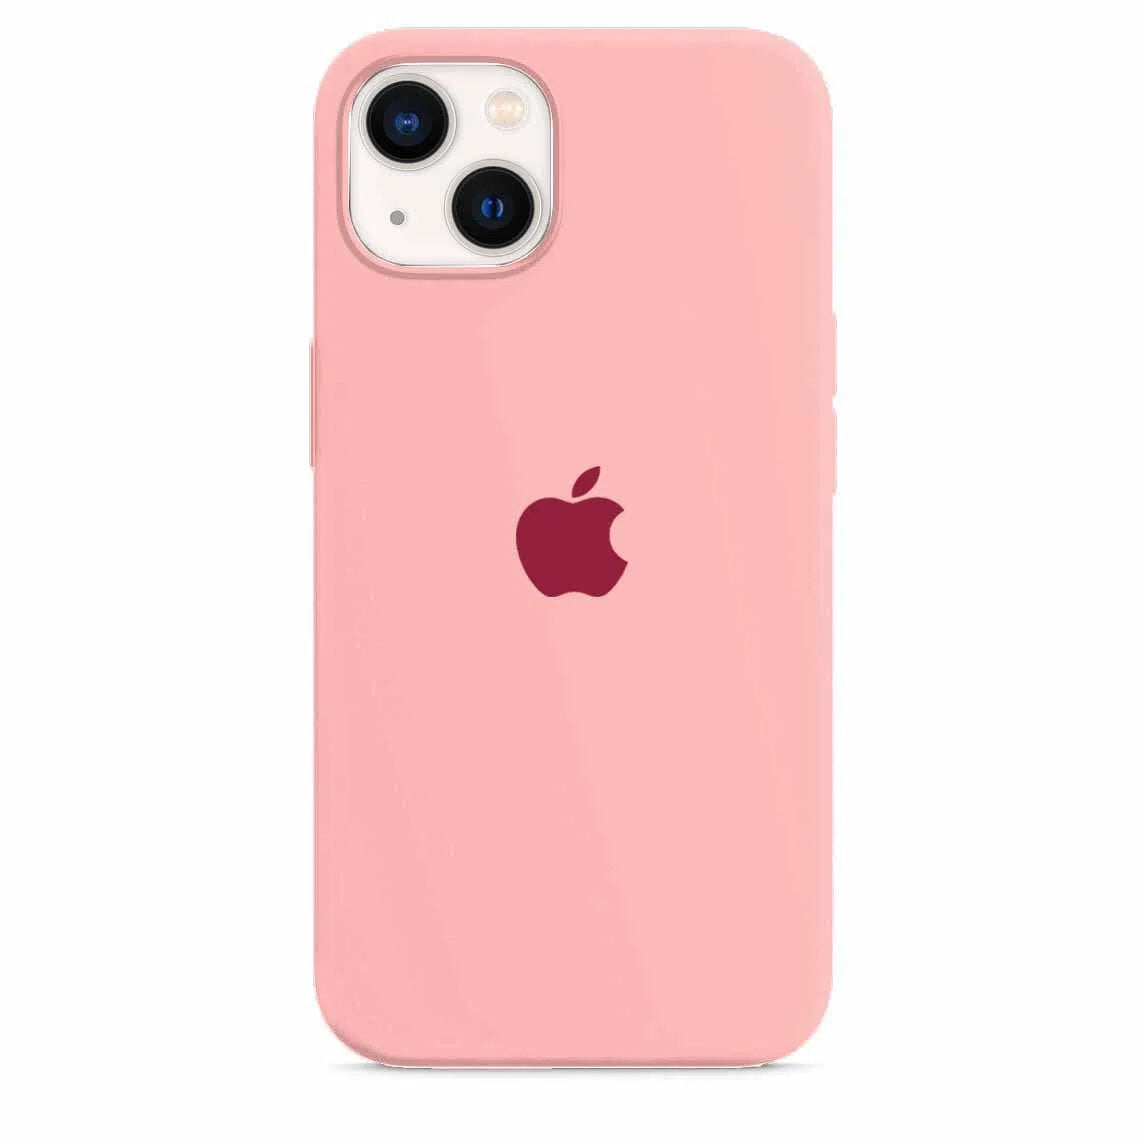 Husa iPhone Silicone Case Baby Pink (Roz) Anca's Store 13 mini 